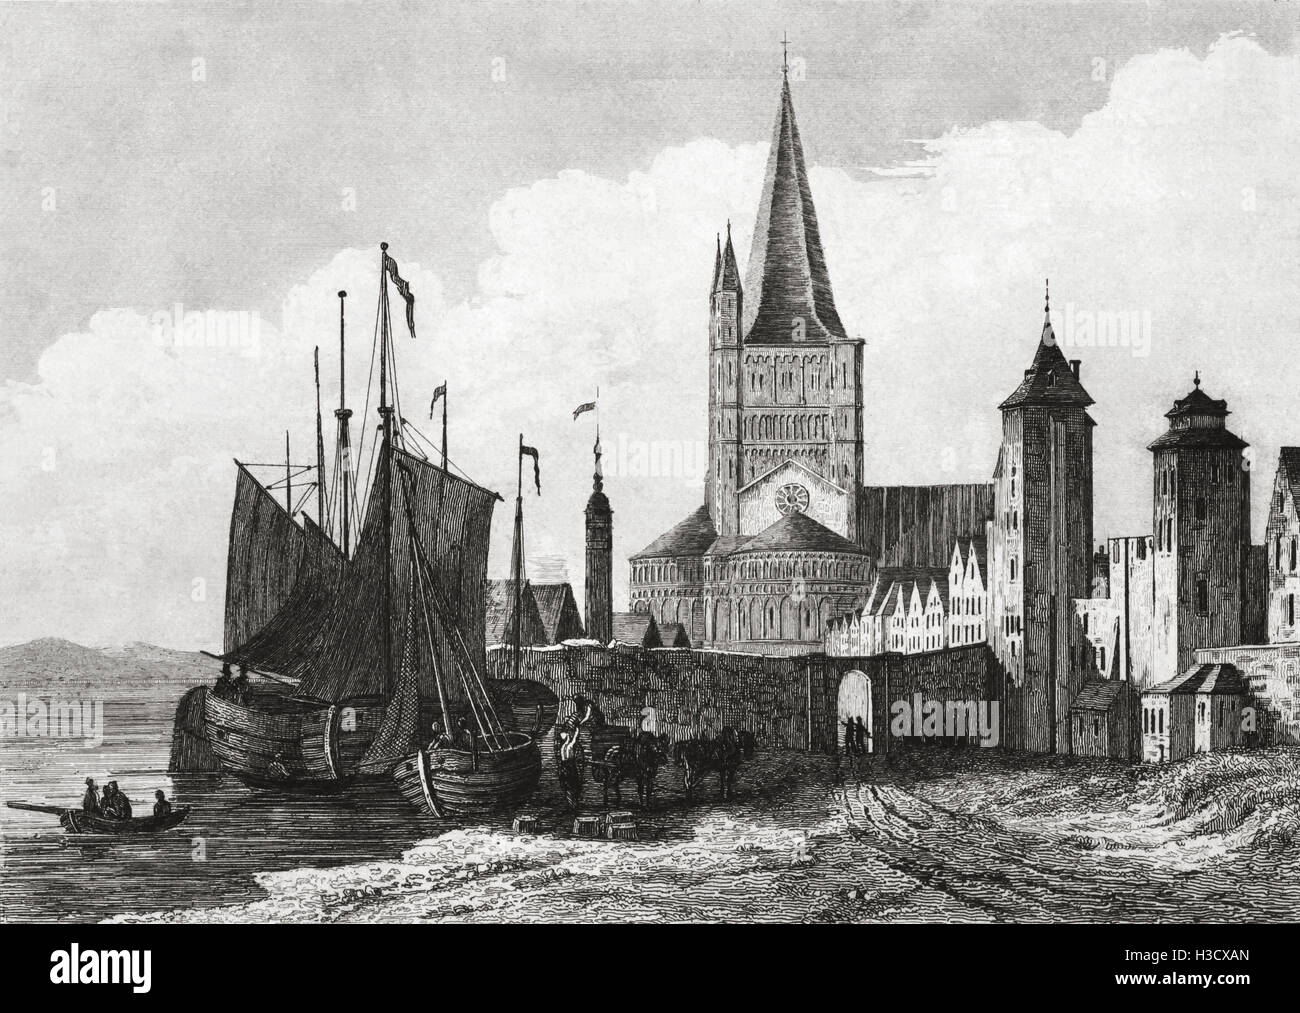 Saint Martin at Cologne ( Köln ), Germany. 19th century steel engraving by Lemaitre Direxit from 'Paysage Marítimo'. Stock Photo